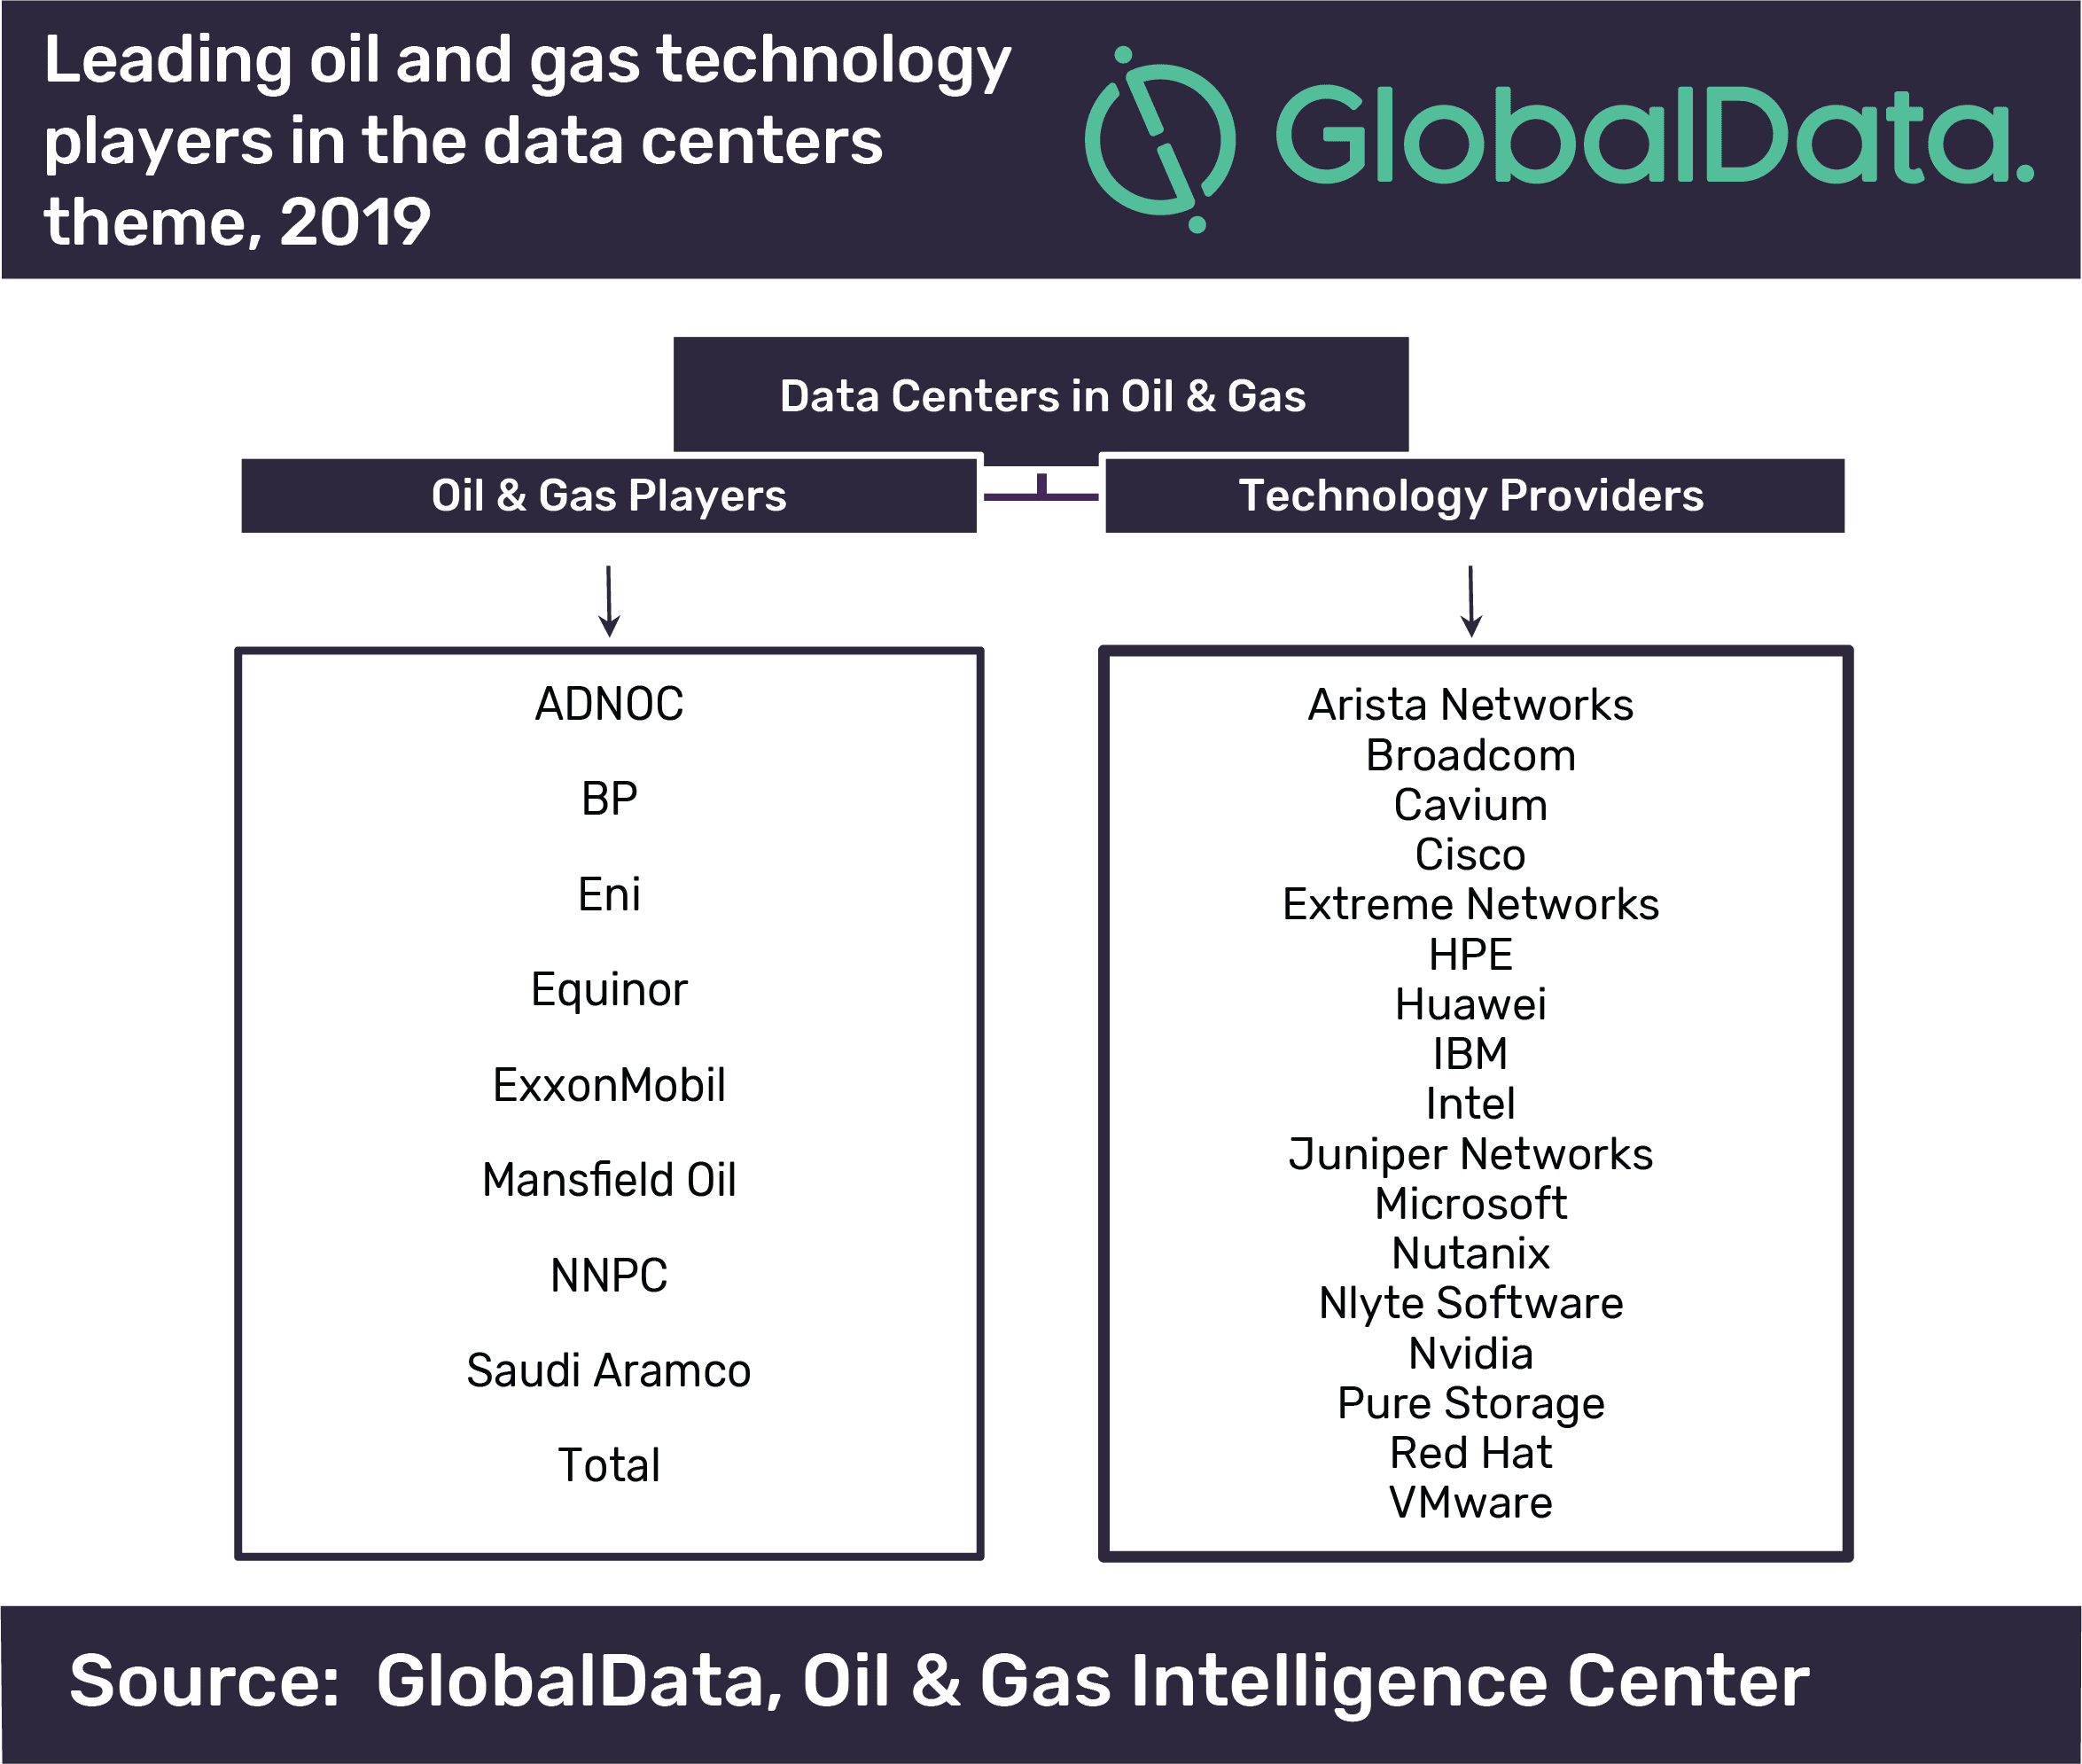 Data centers provide pivotal role in data processing and warehousing in the oil and gas industry